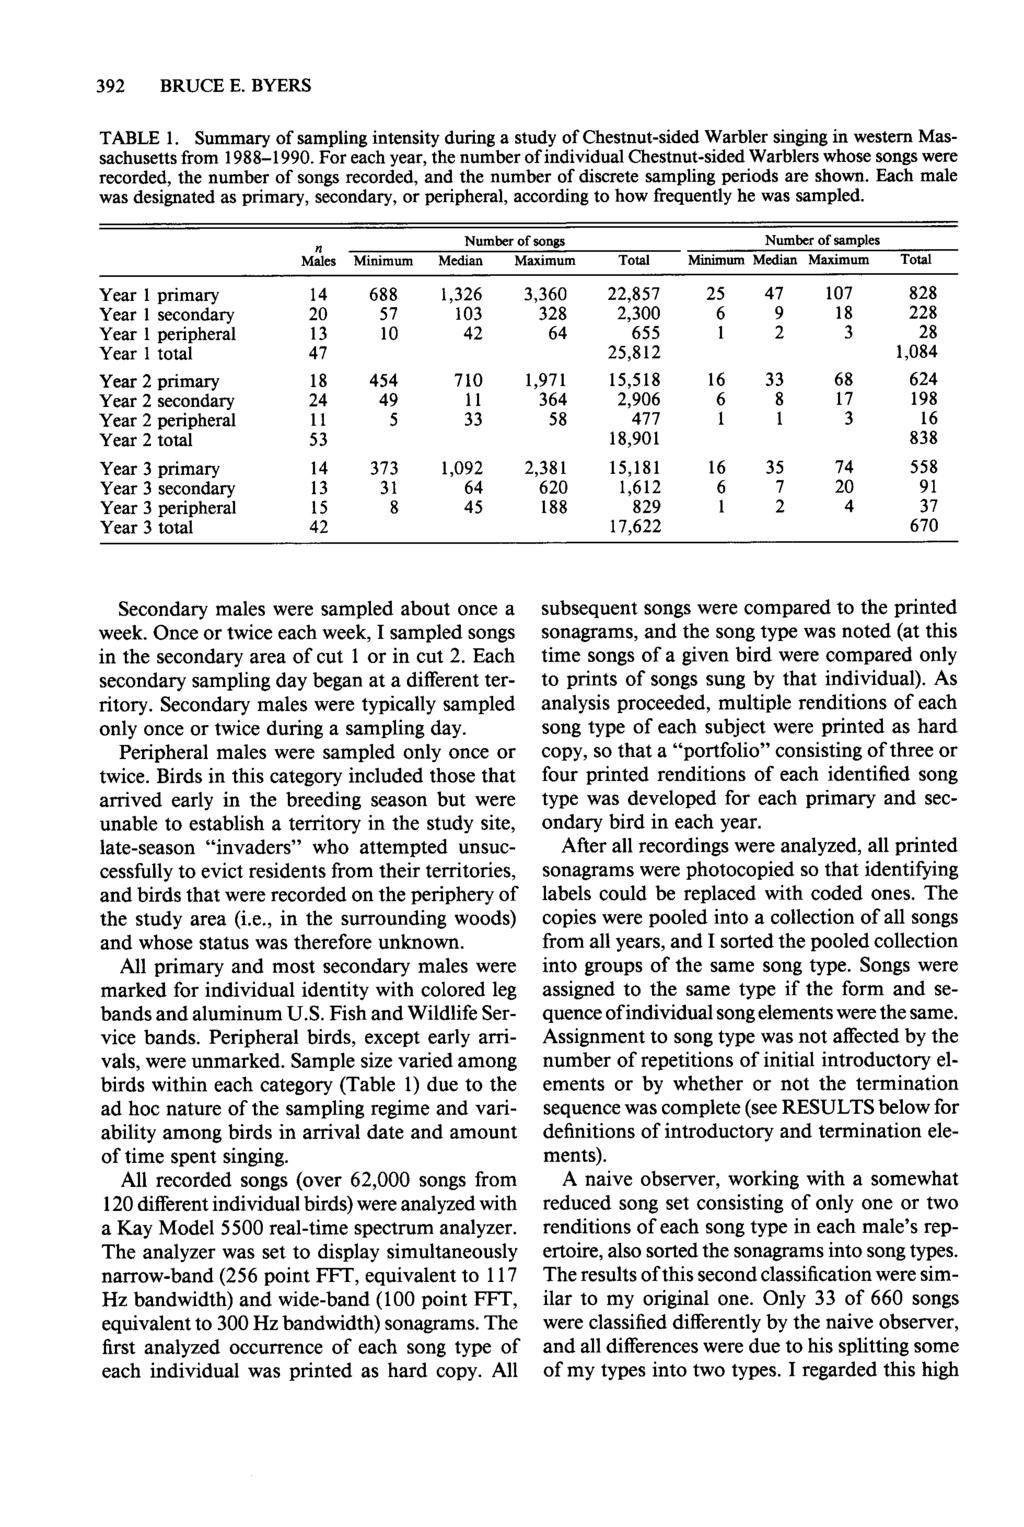 392 BRUCE E BYERS TABLE 1 Summary of sampling intensity during a study of Chestnut-sided Warbler singing in western Massachusetts from 1988-l 990 For each year, the number of individual